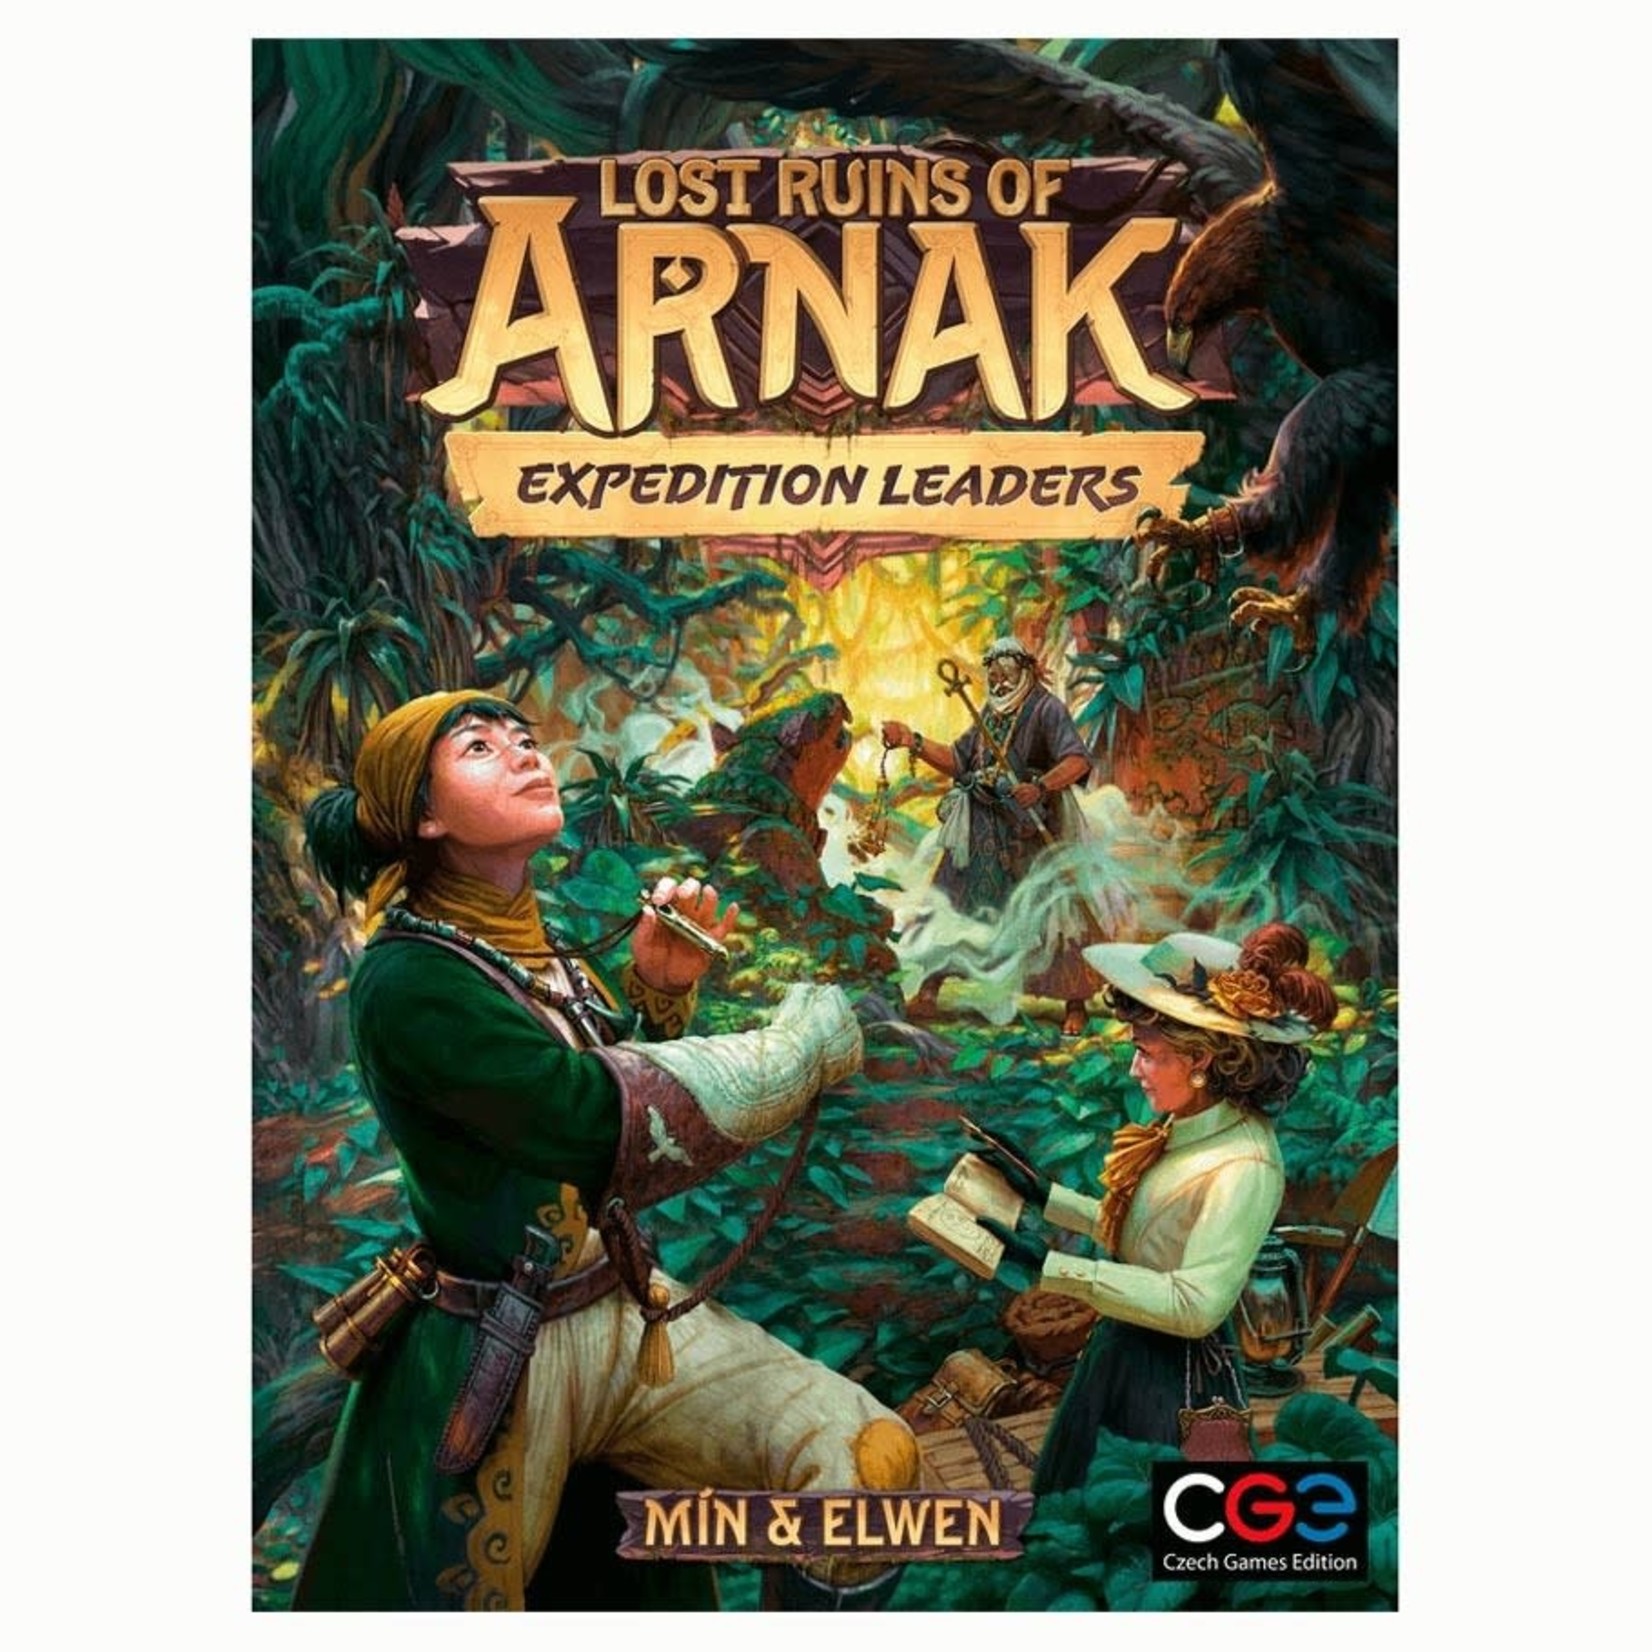 Czech Games Edition, Inc. Lost Ruins of Arnak: Expedition Leaders